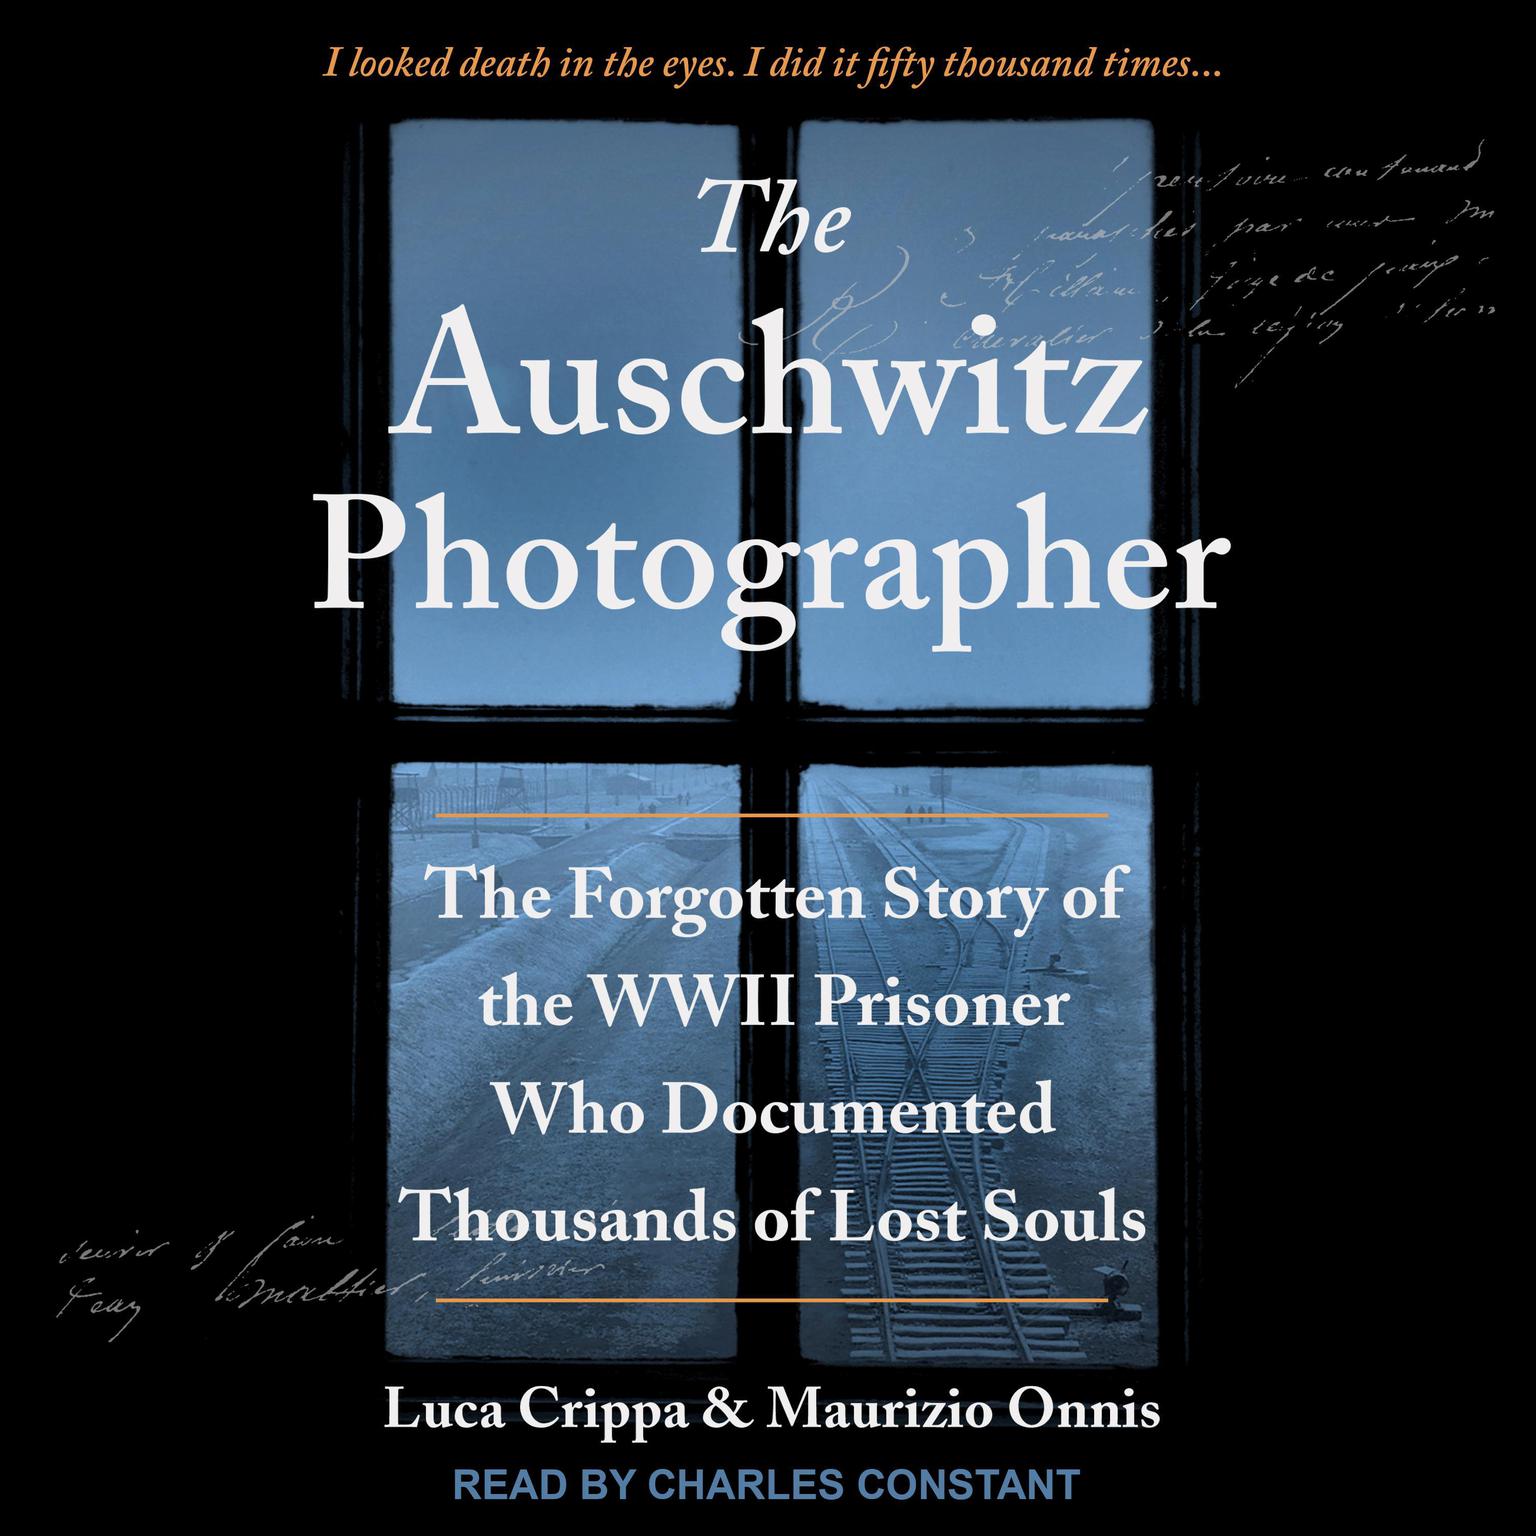 The Auschwitz Photographer: The Forgotten Story of the WWII Prisoner Who Documented Thousands of Lost Souls Audiobook, by Luca Crippa